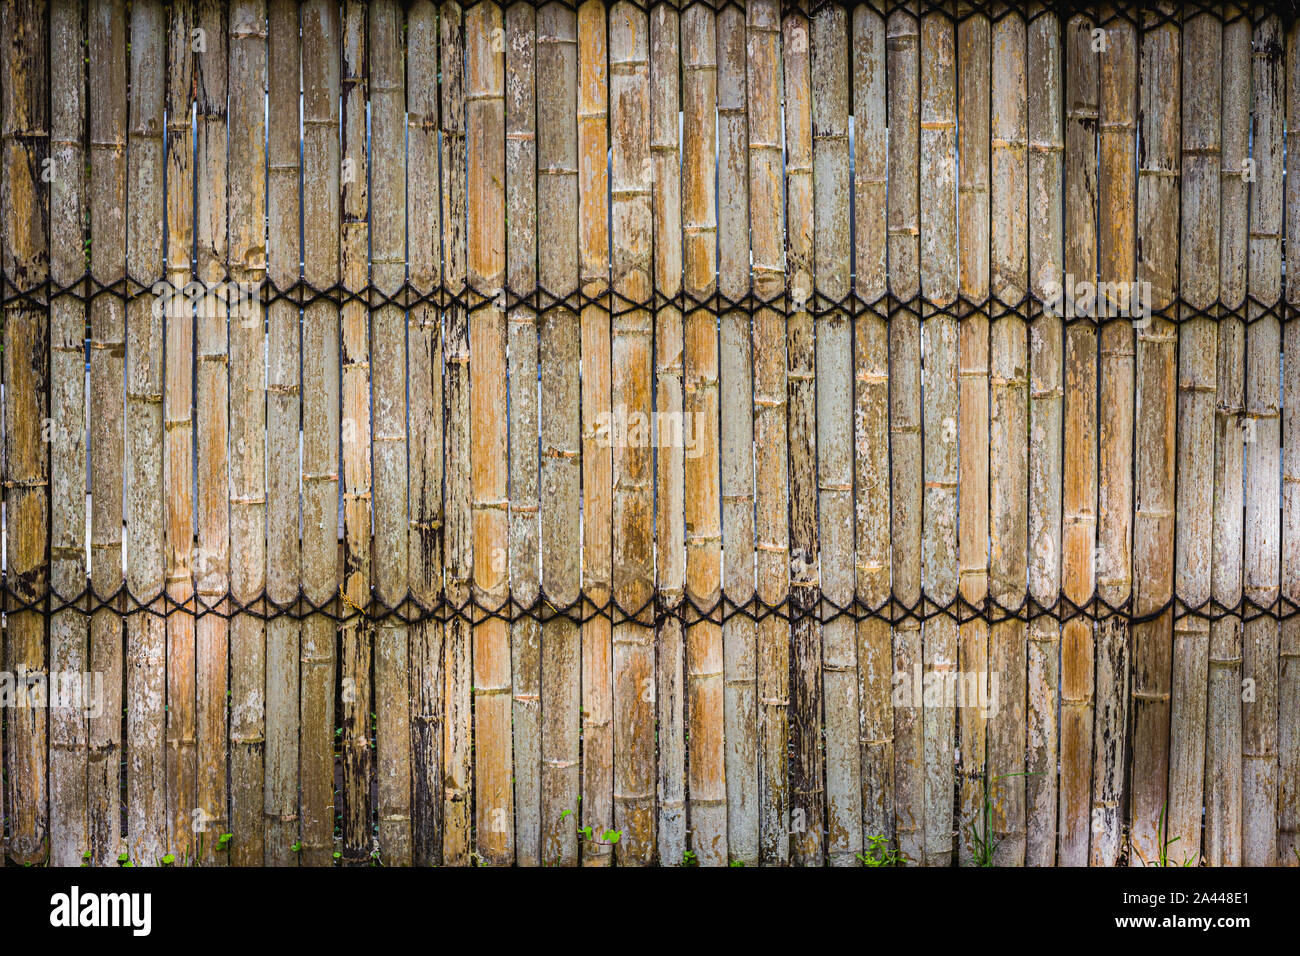 Bamboo wall texture background with The rope is tied together in a row. Stock Photo